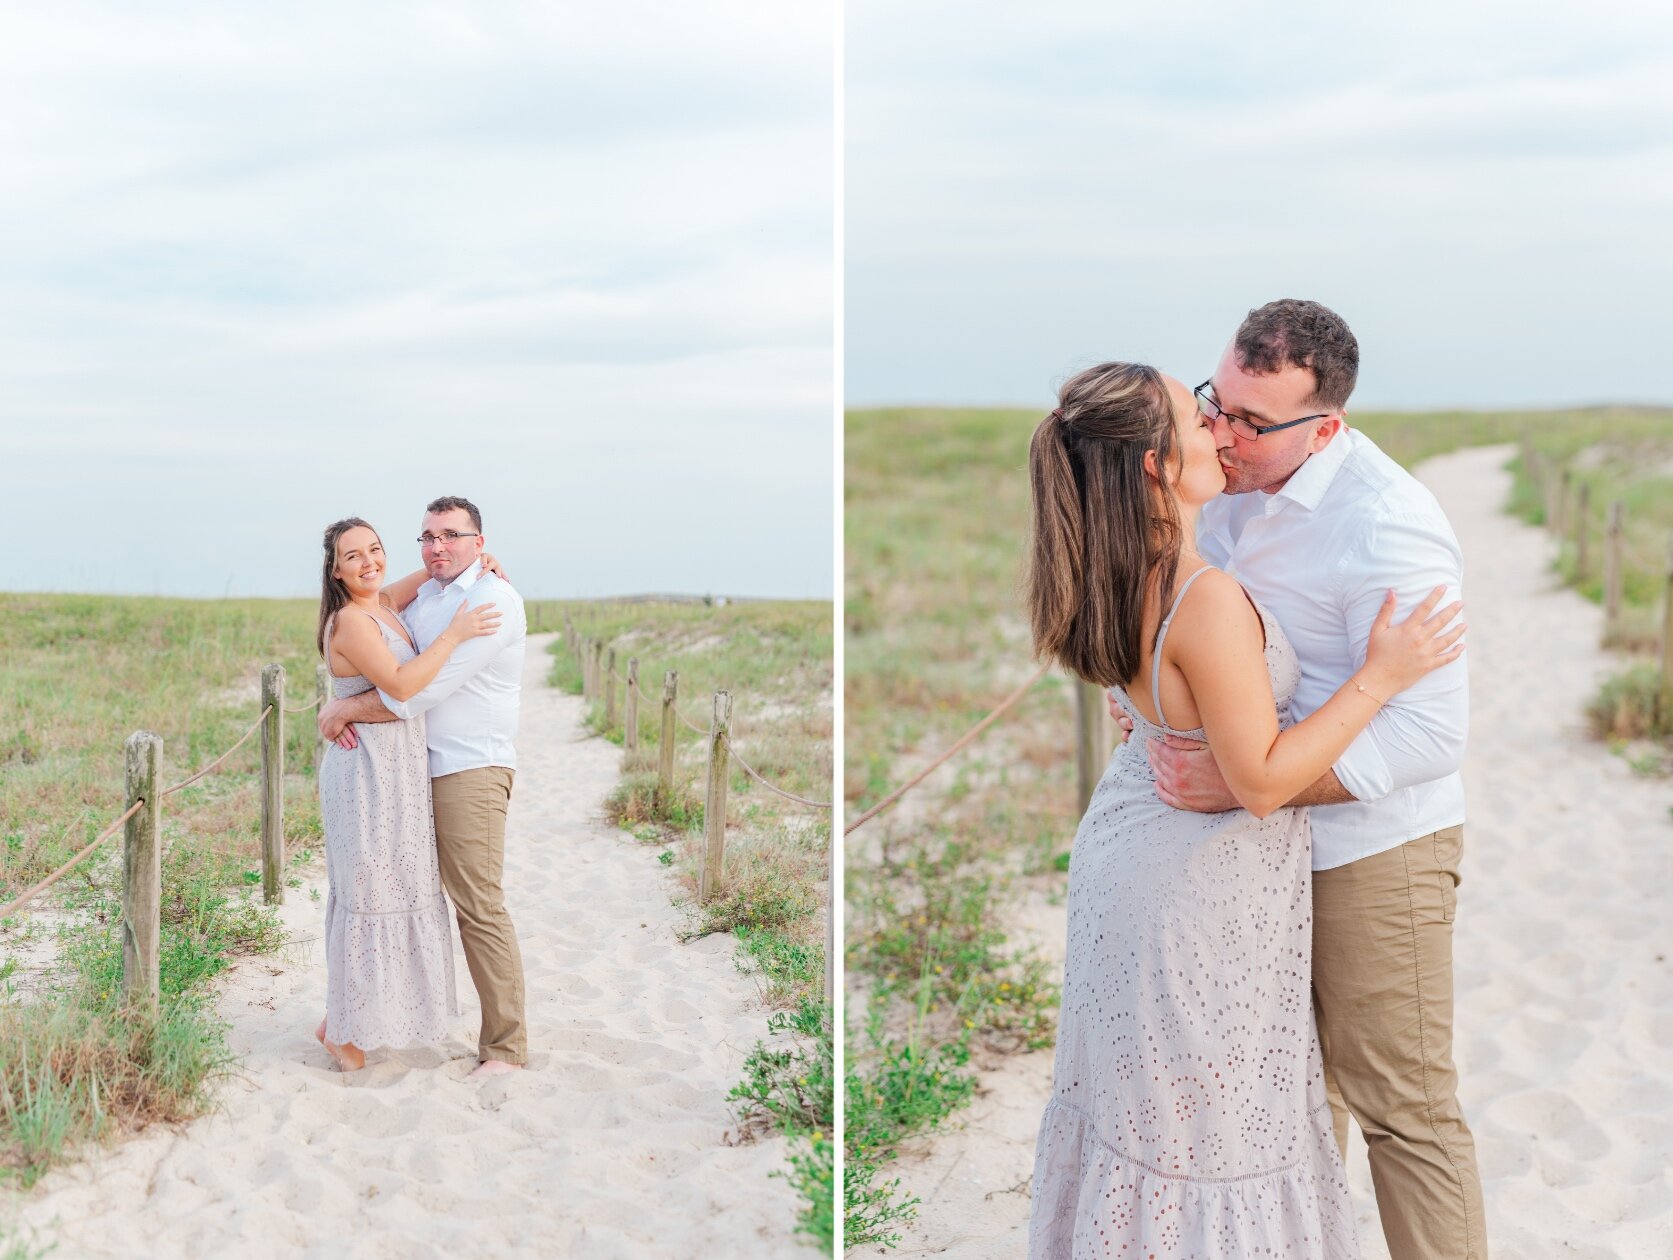 Orange Beach Couples Portrait Photoshoot in August Photographed by Kristen Marcus Photography